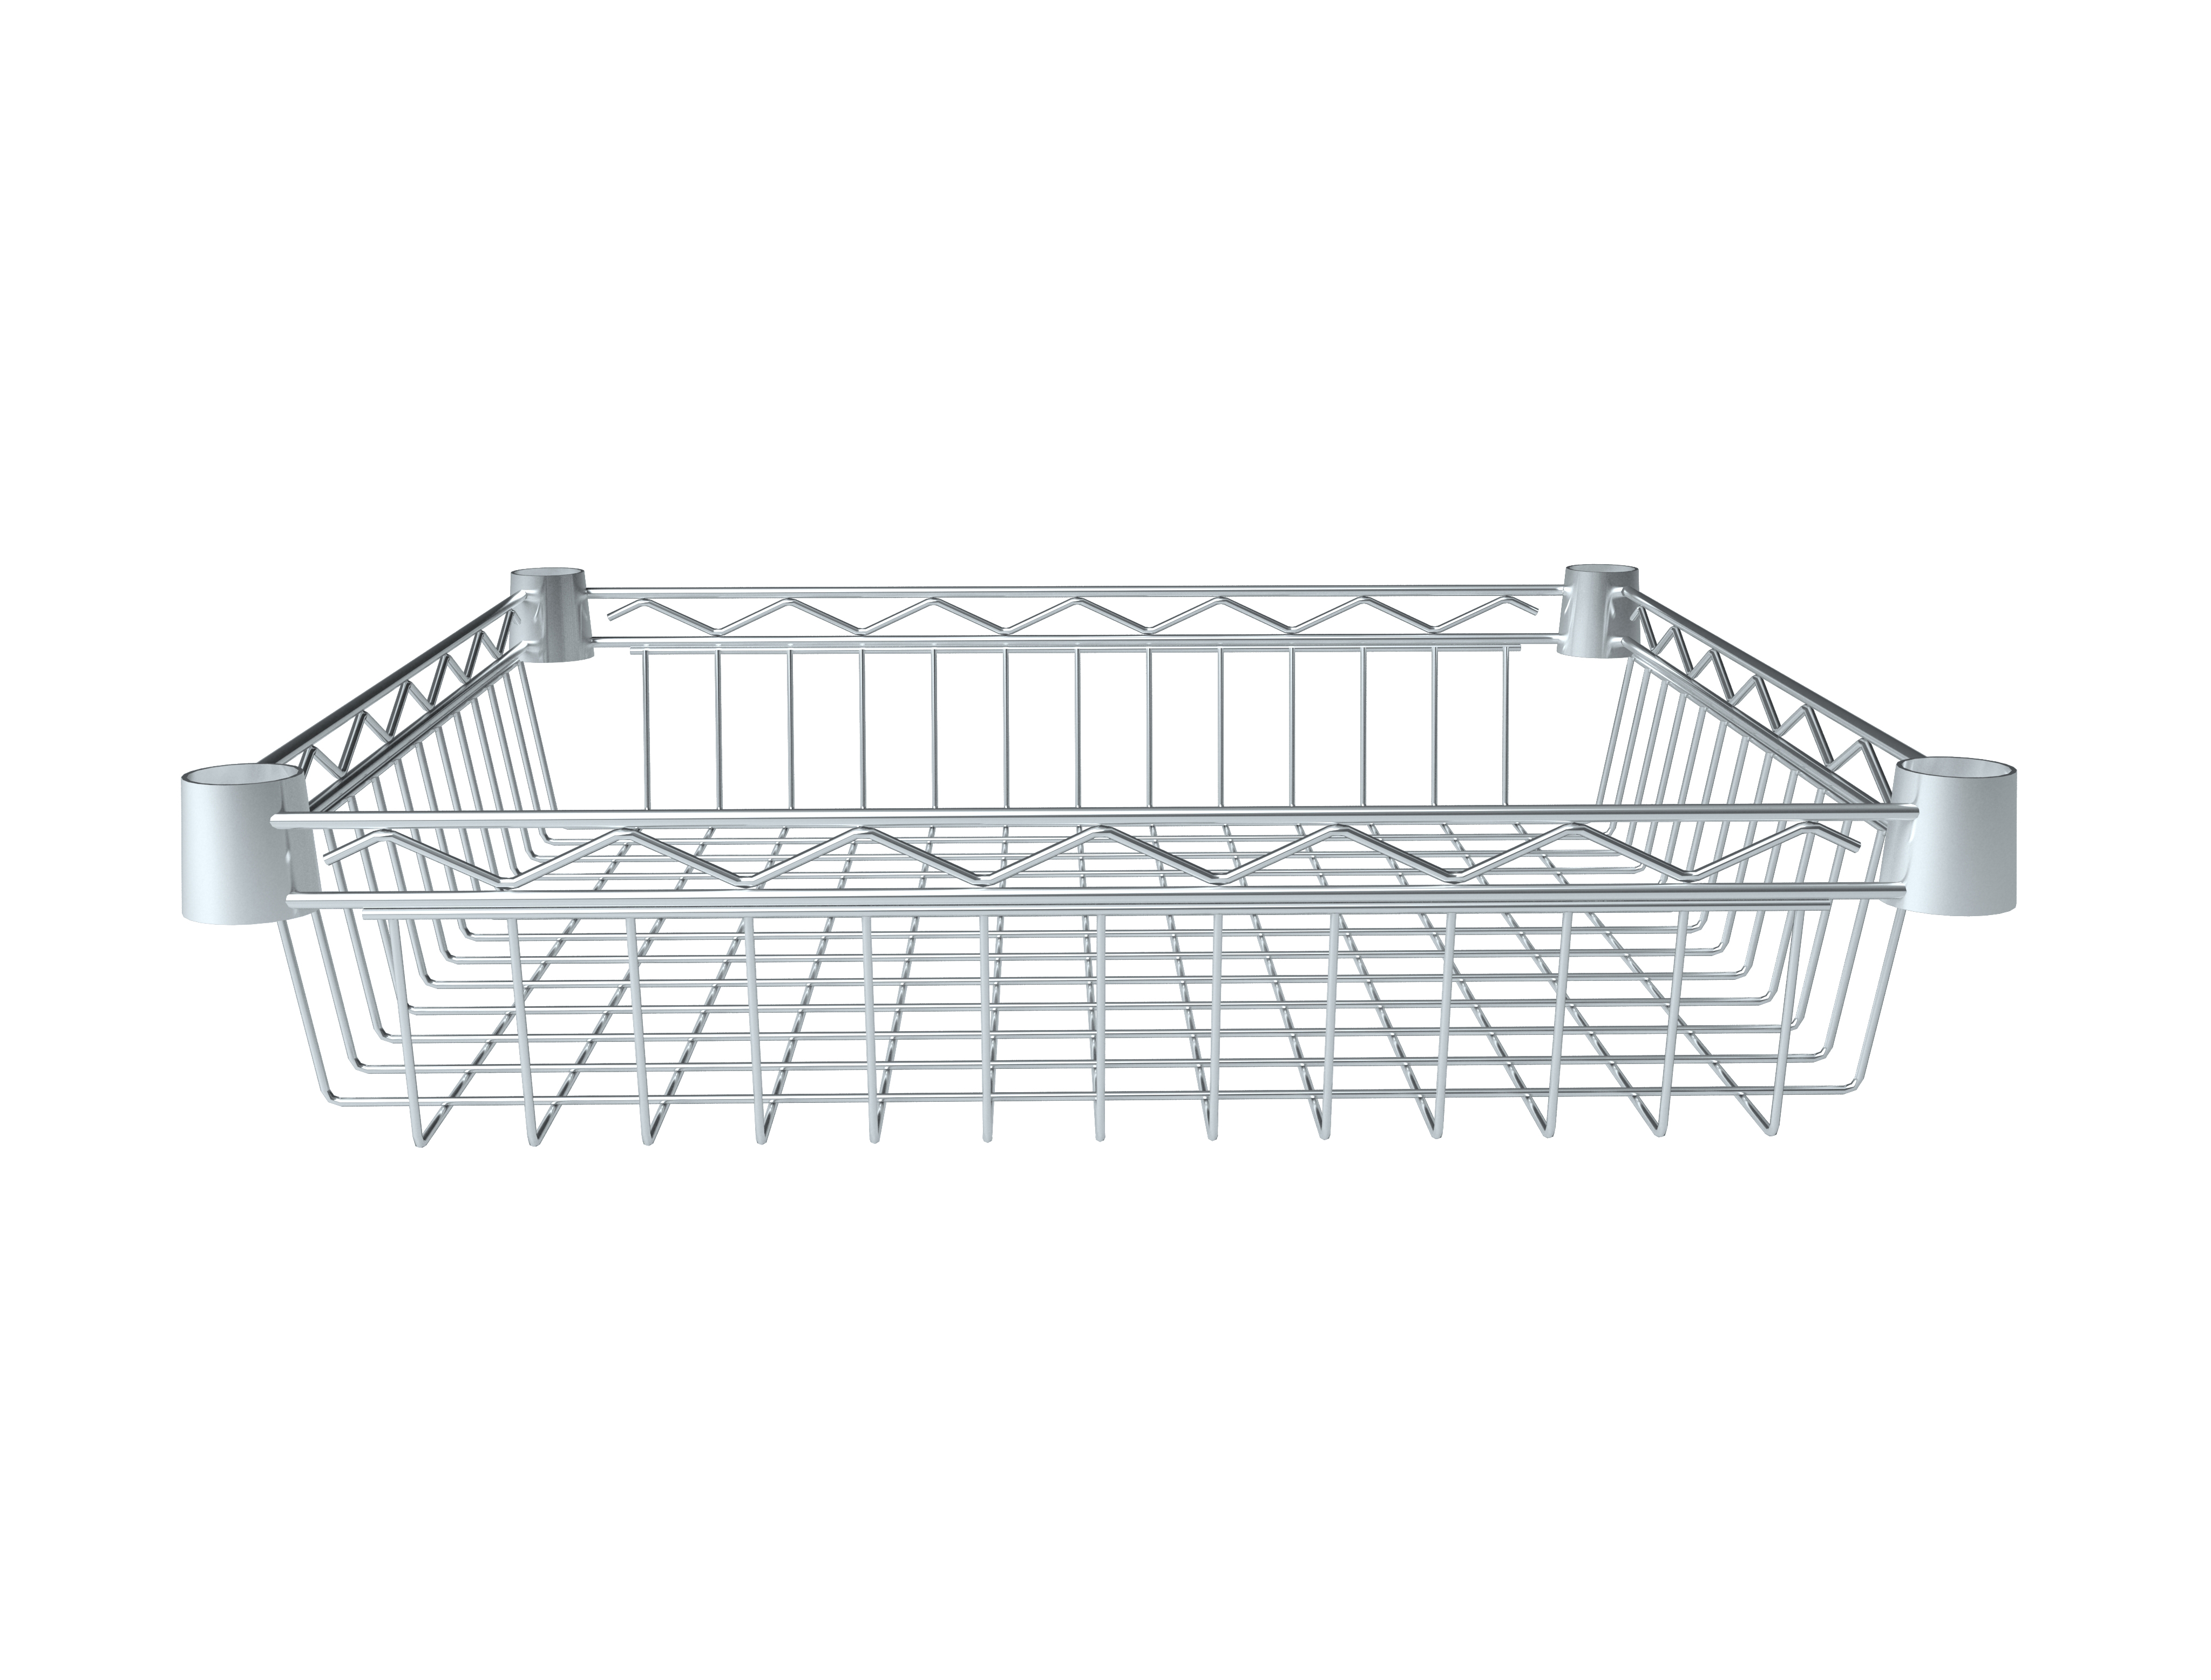 HSS Extra Wire Basket 16"x16"x4" Deep Fits on 7/8" Pole Diameter, Chrome - image 2 of 3